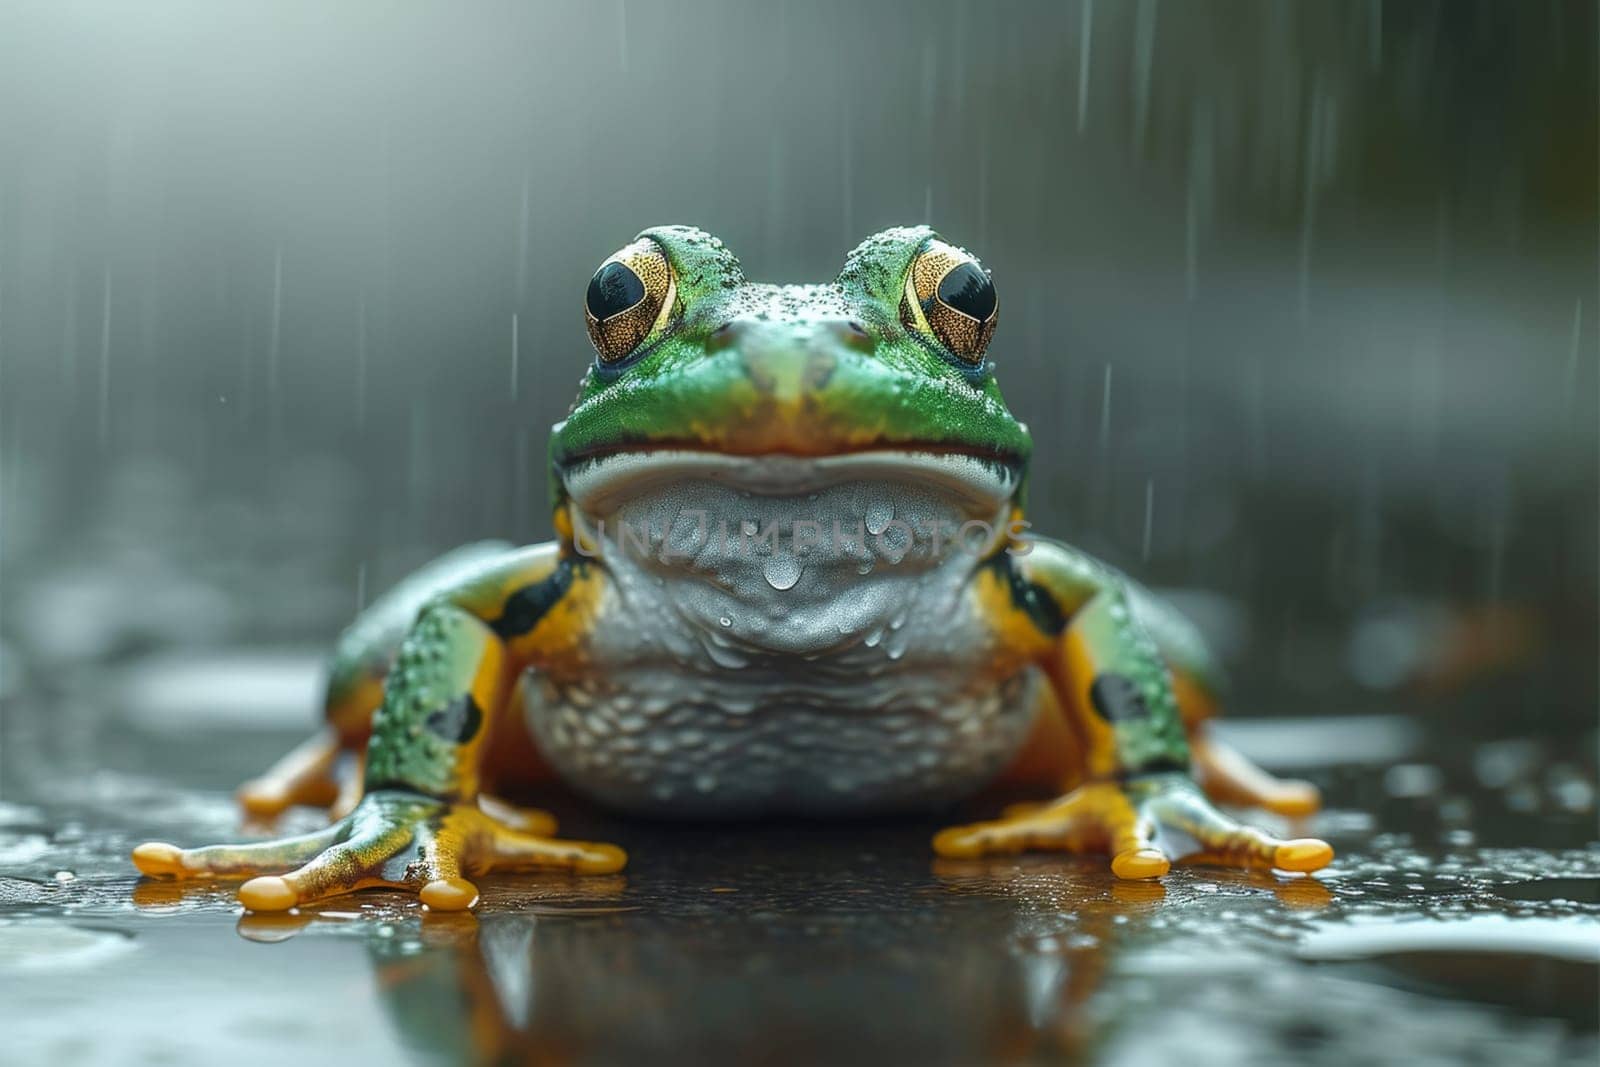 A tree green frog walks in the rain in nature by Lobachad